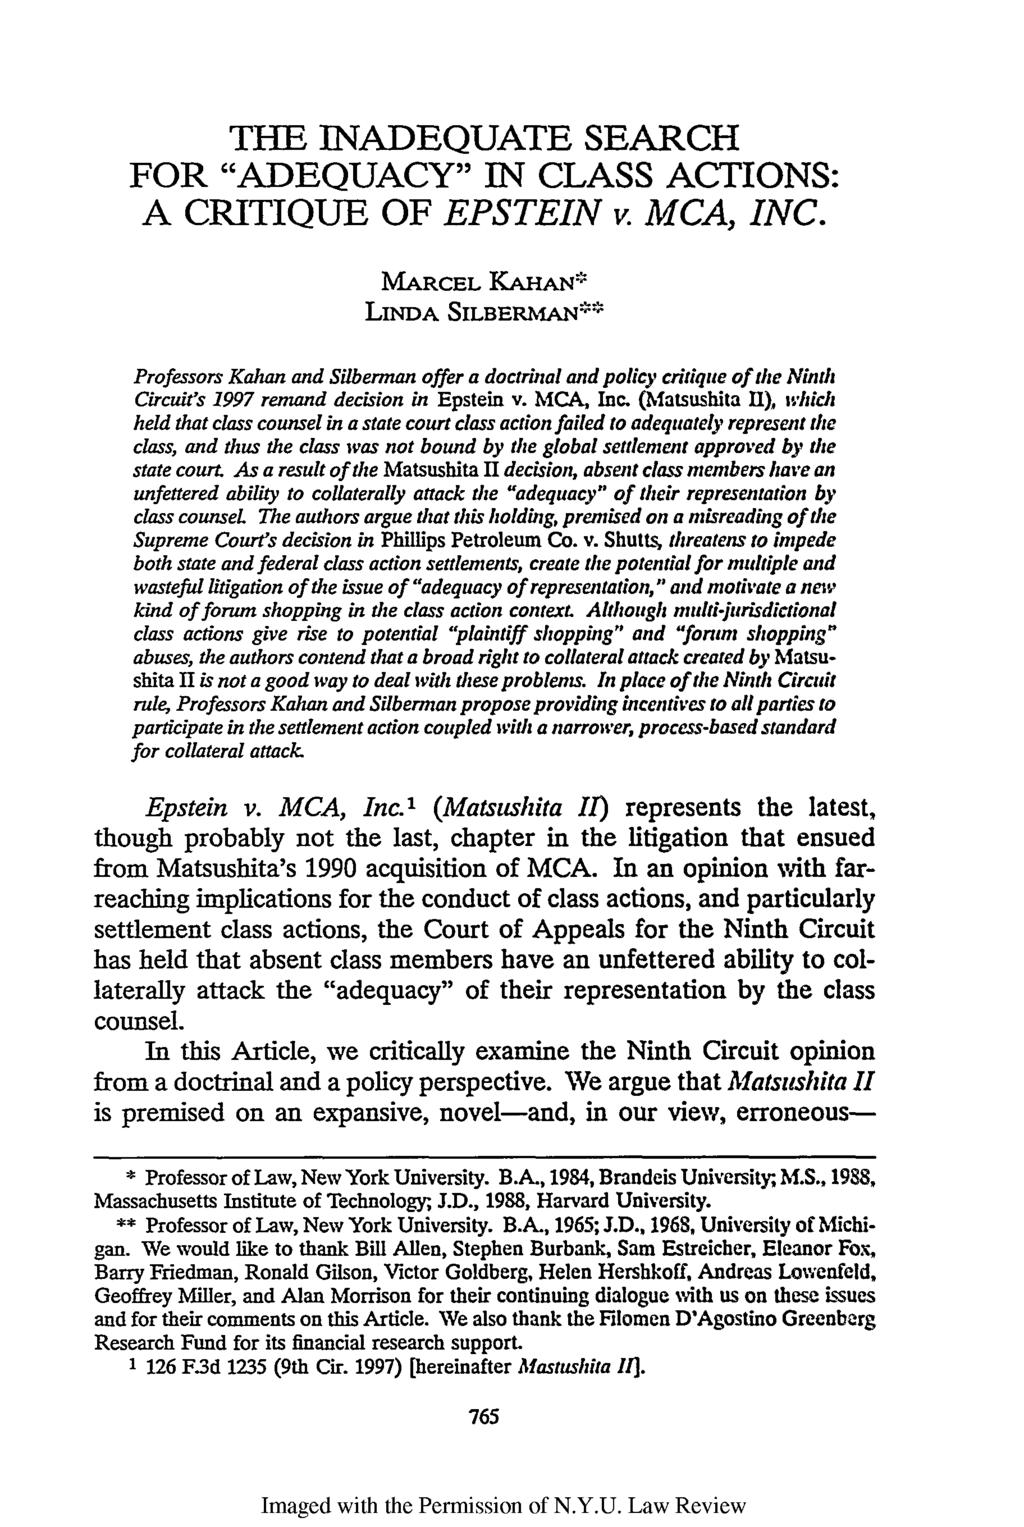 THE INADEQUATE SEARCH FOR "ADEQUACY" IN CLASS ACTIONS: A CRITIQUE OF EPSTEIN v. MCA, INC.